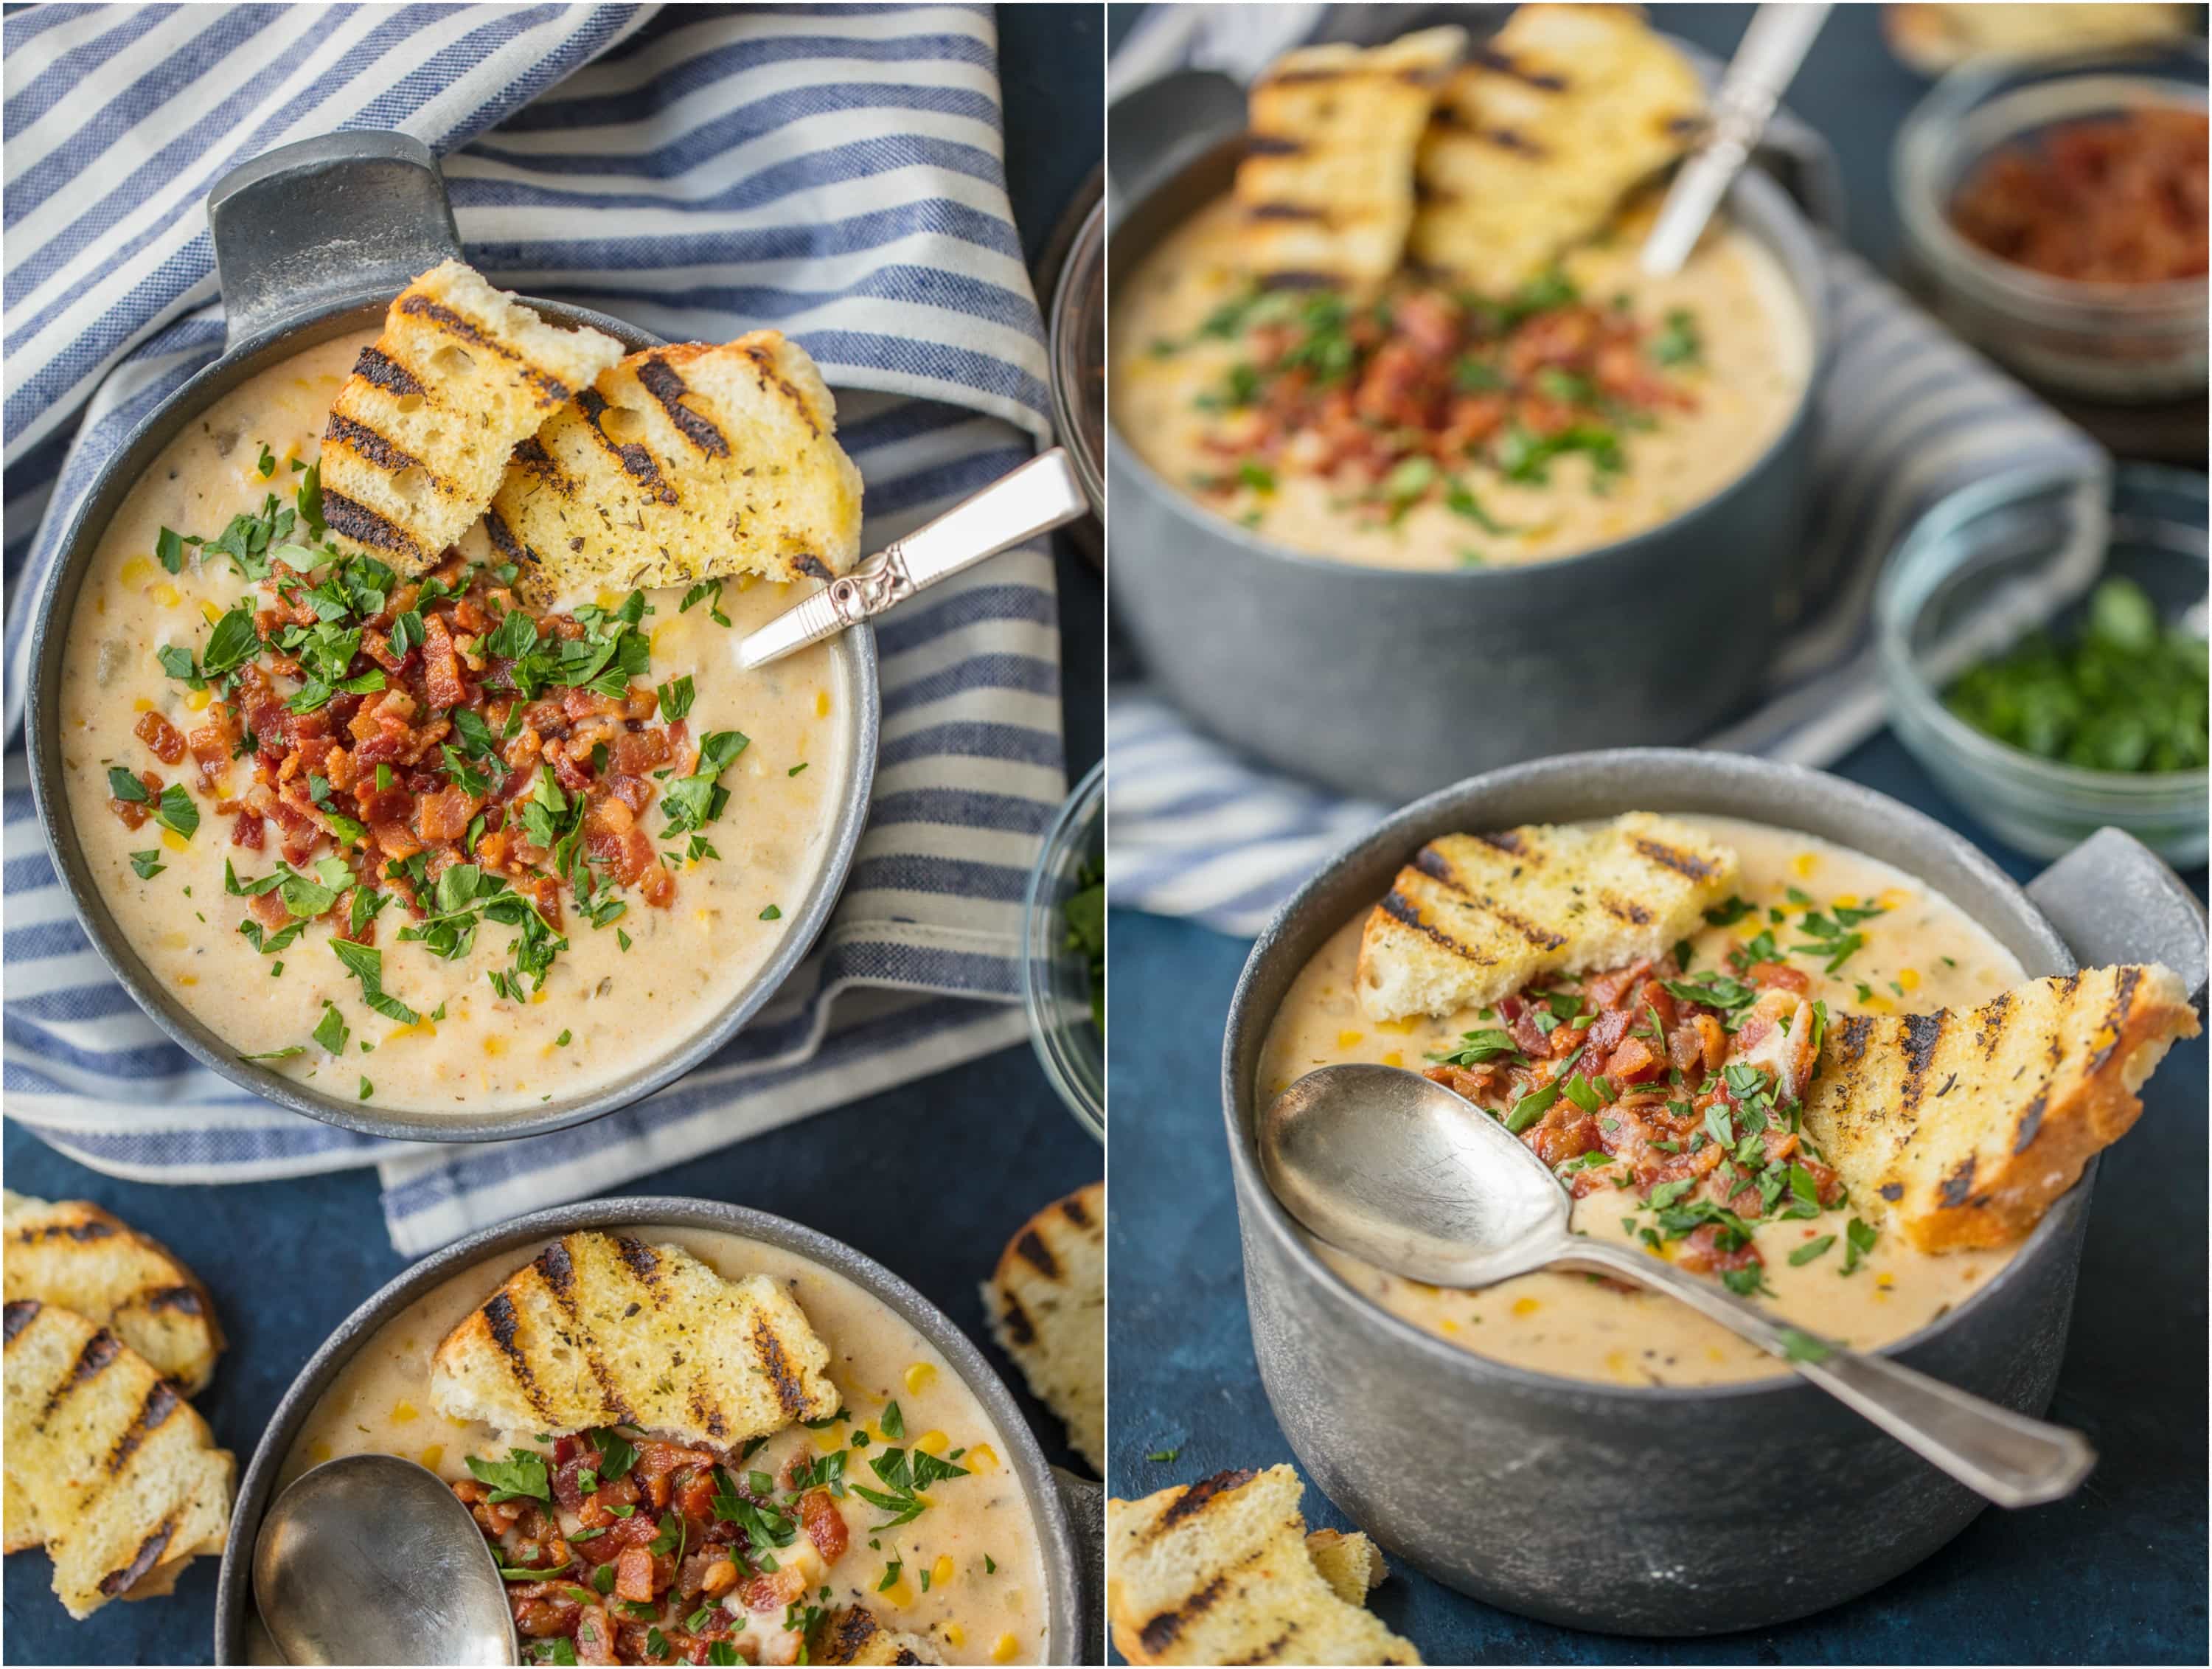 BACON CORN CHOWDER is a must make for Winter! This delicious sweet chowder loaded with potatoes, corn, bacon, and so much flavor is the ultimate comfort food.